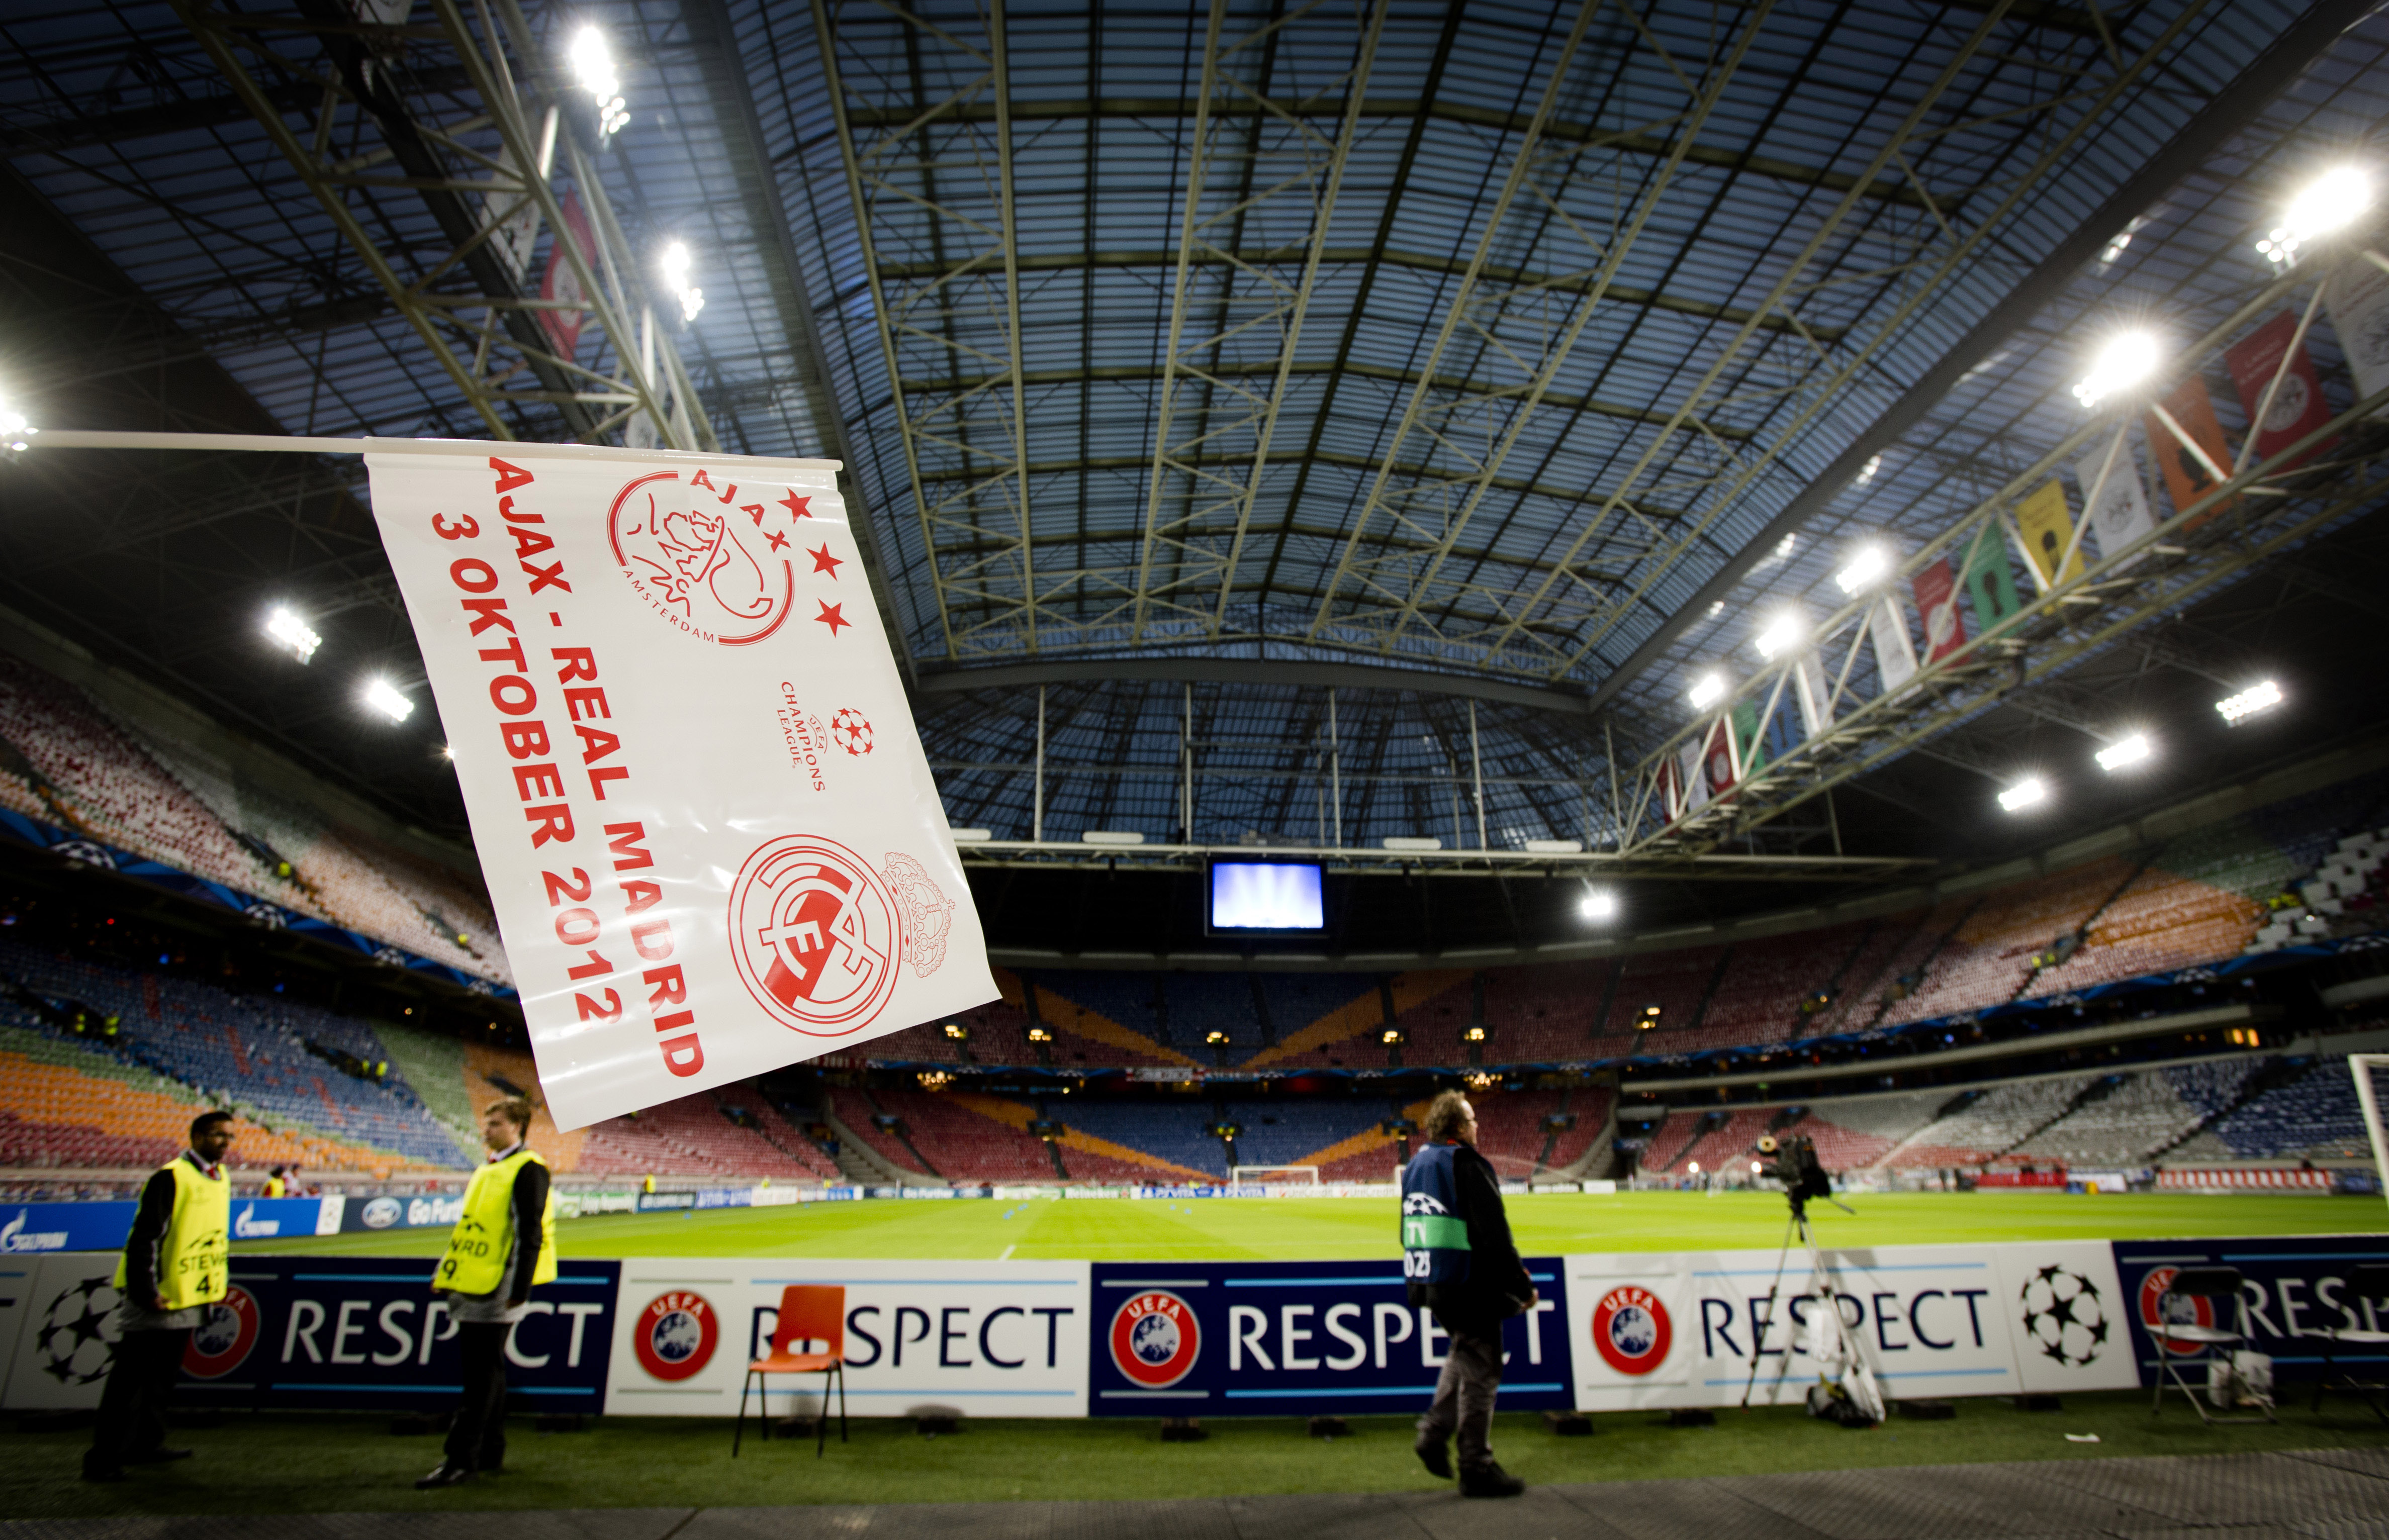 AMSTERDAM, NETHERLANDS - OCTOBER 03:  General view of the Amsterdam ArenA, home of AFC Ajax taken during the UEFA Champions League group stage match between AFC Ajax and Real Madrid CF at the Amsterdam ArenA on October 3, 2012 in Amsterdam, Netherlands. (Photo by Robin Utrecht/EuroFootball/Getty Images)